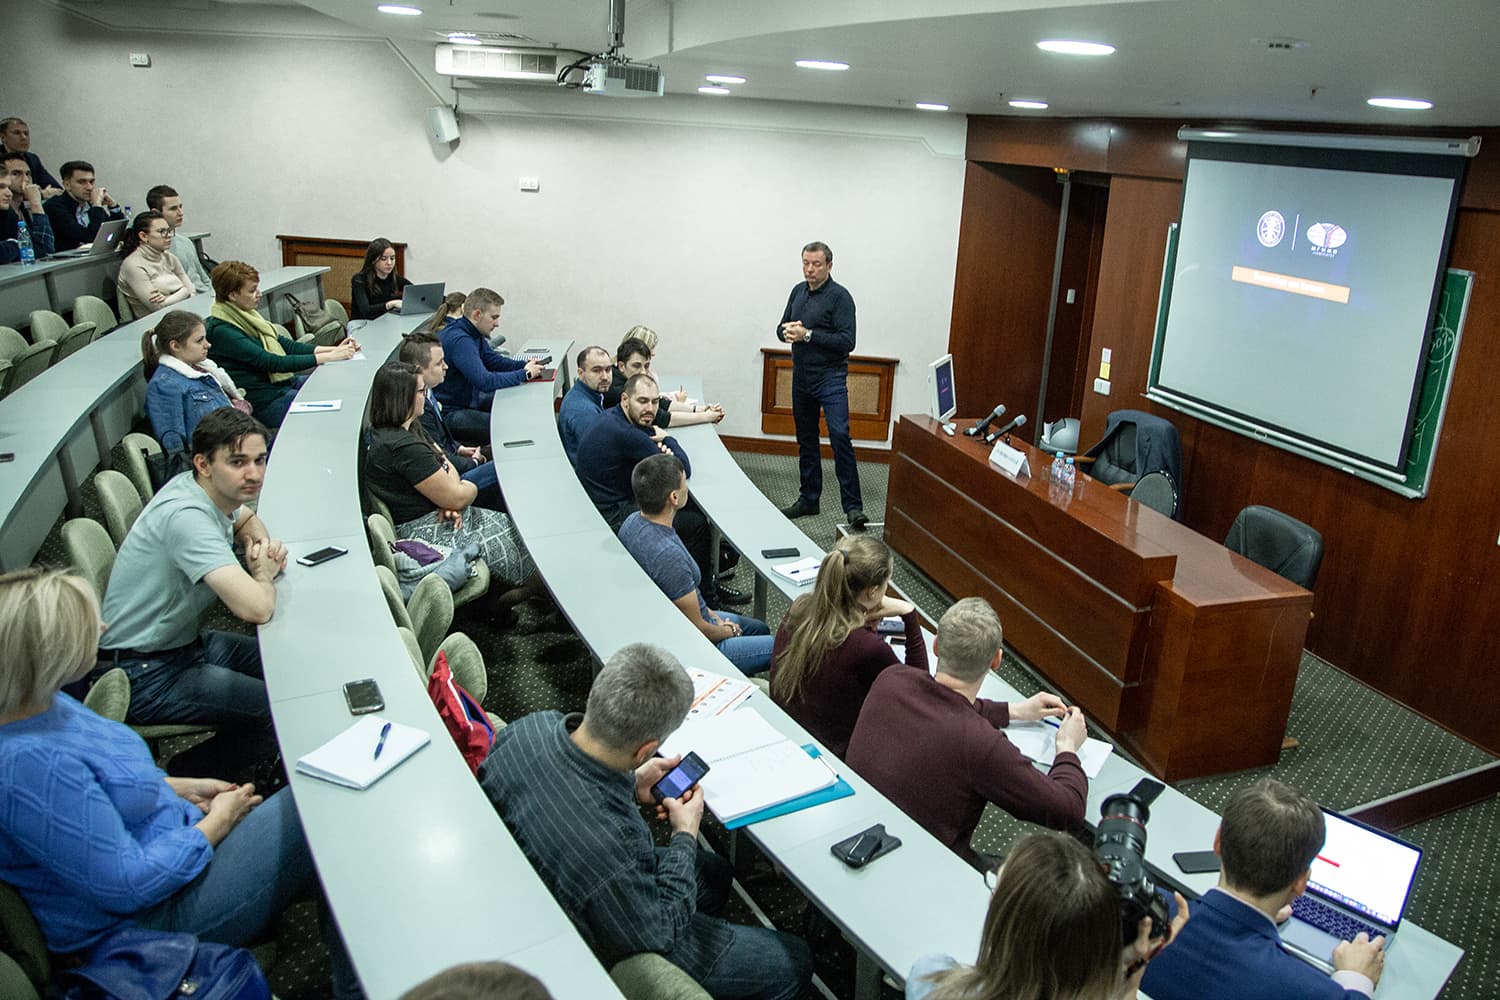 Sergey Kuschenko gives a lecture at MGIMO on topic “Basketball as business”